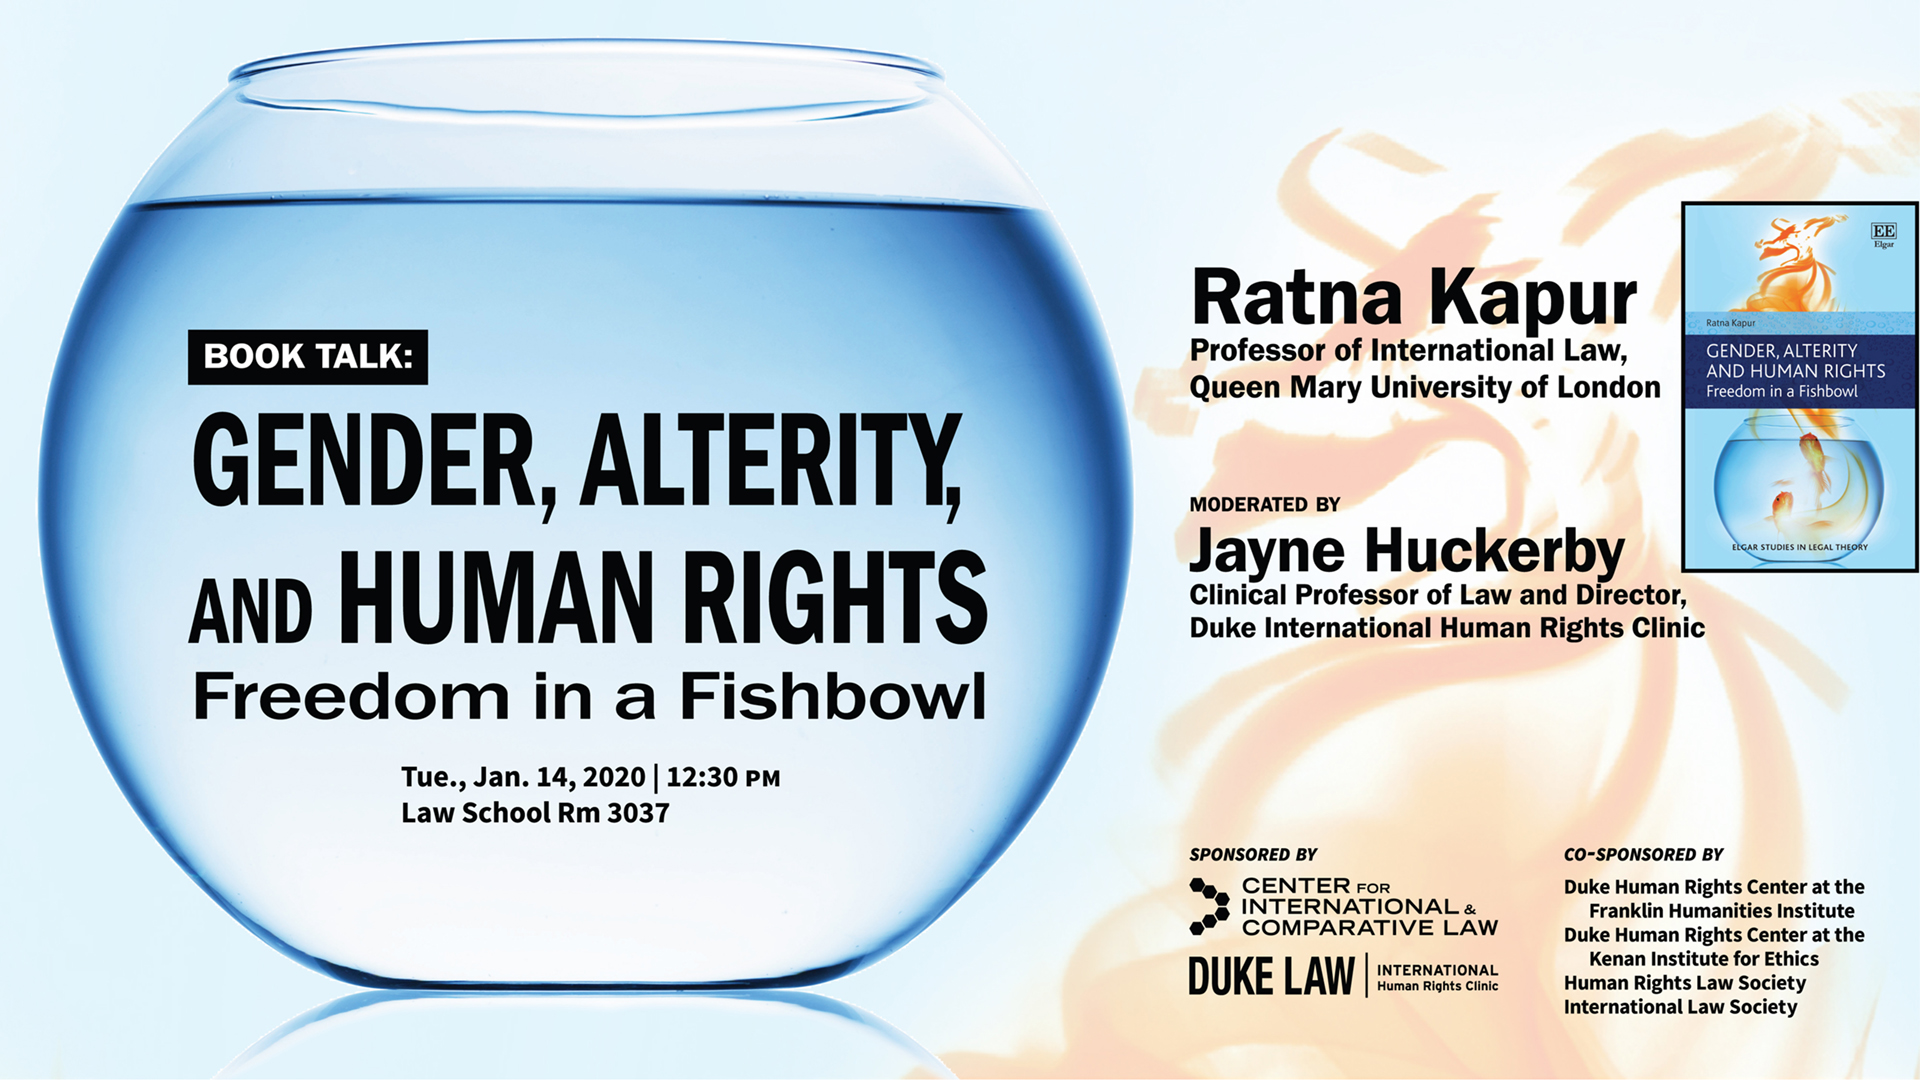 Promo flyer for Book Talk "Gender, Alterity, and Human Rights" - info below